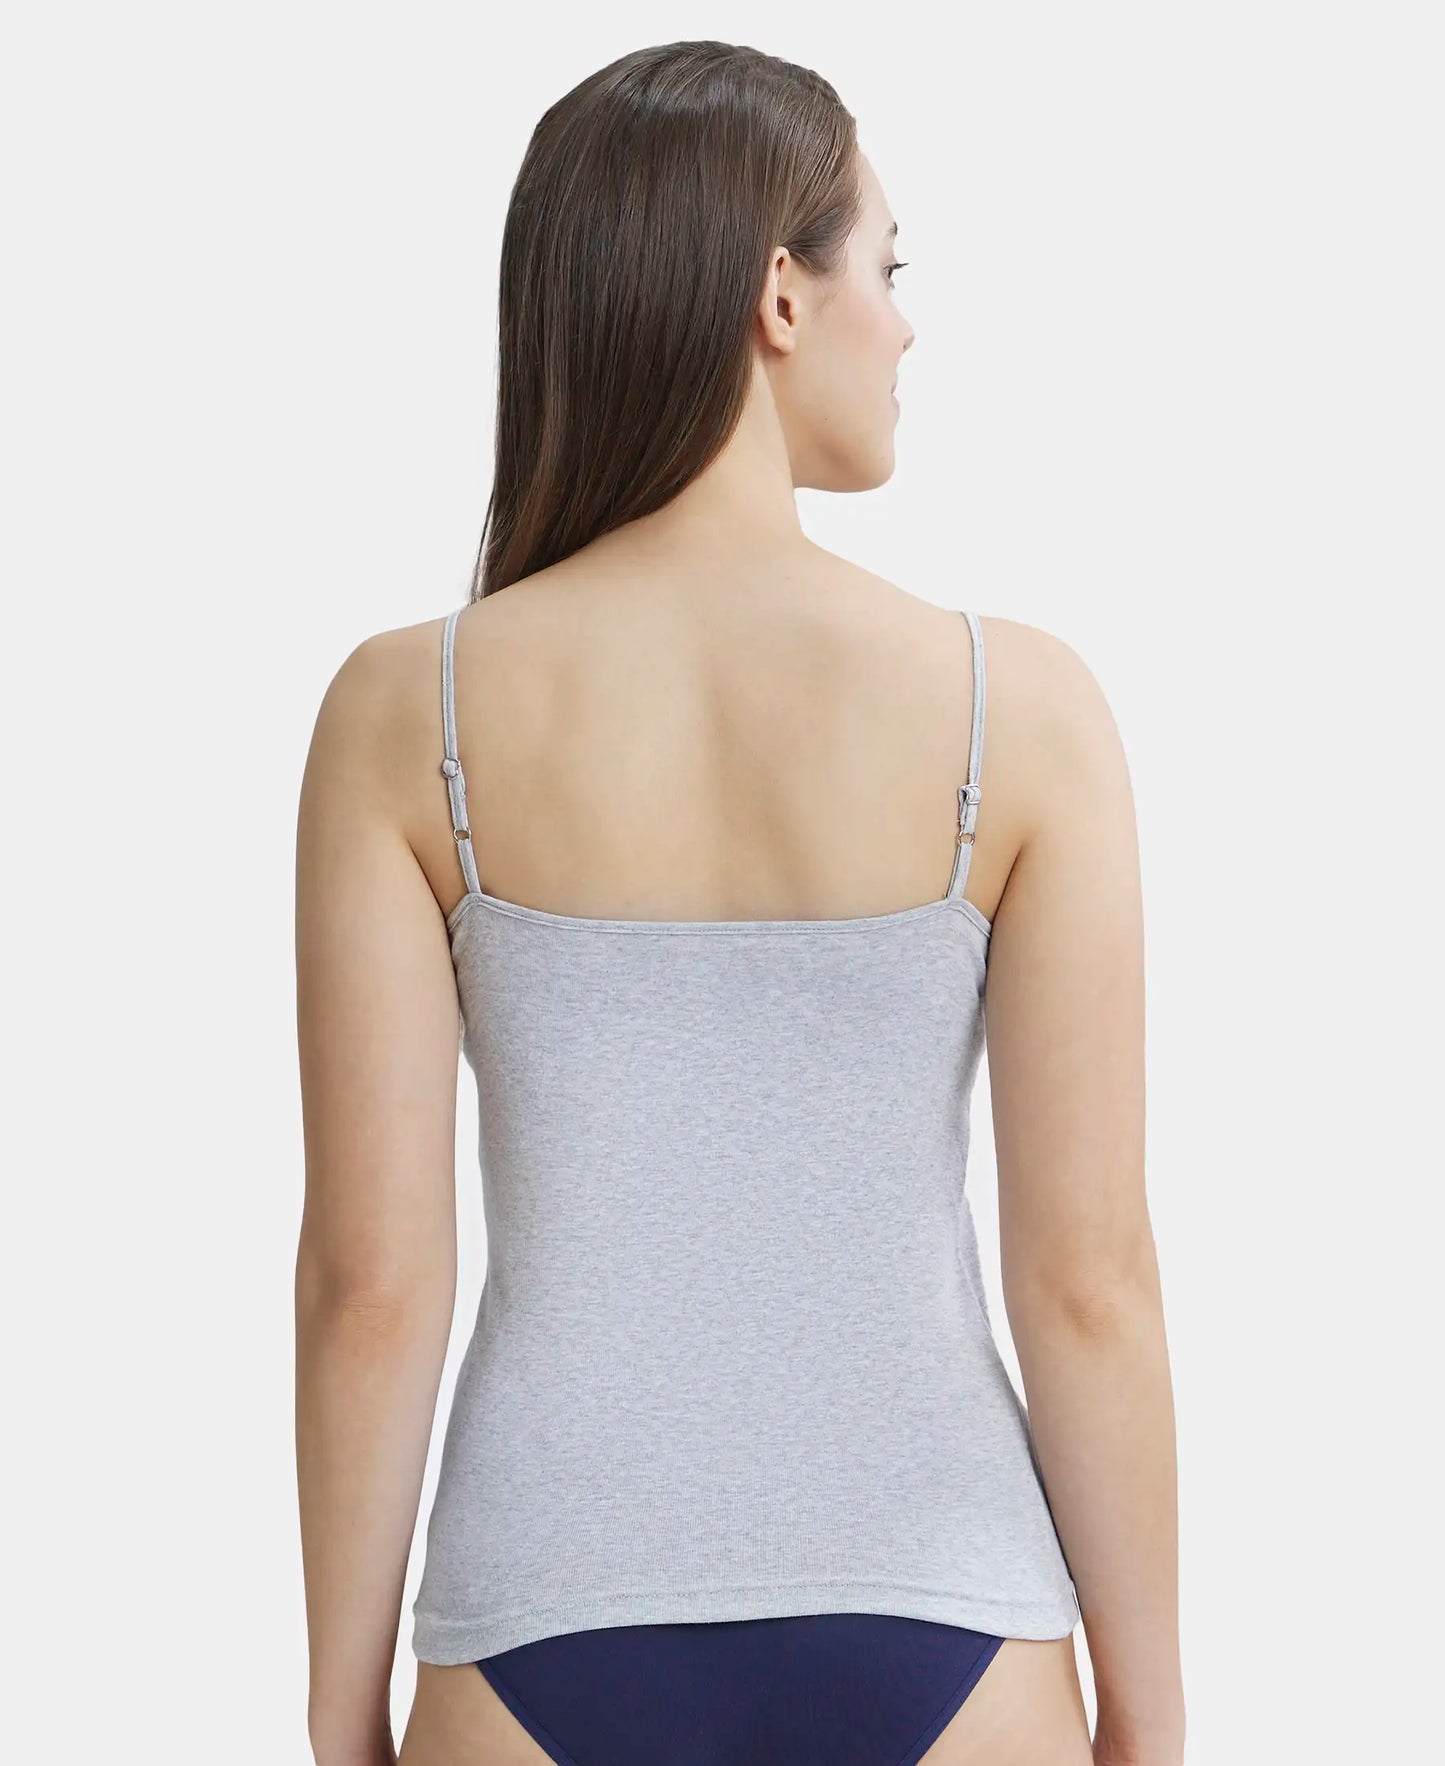 Super Combed Cotton Rib Camisole with Adjustable Straps and StayFresh Treatment - Steel Grey Melange-3